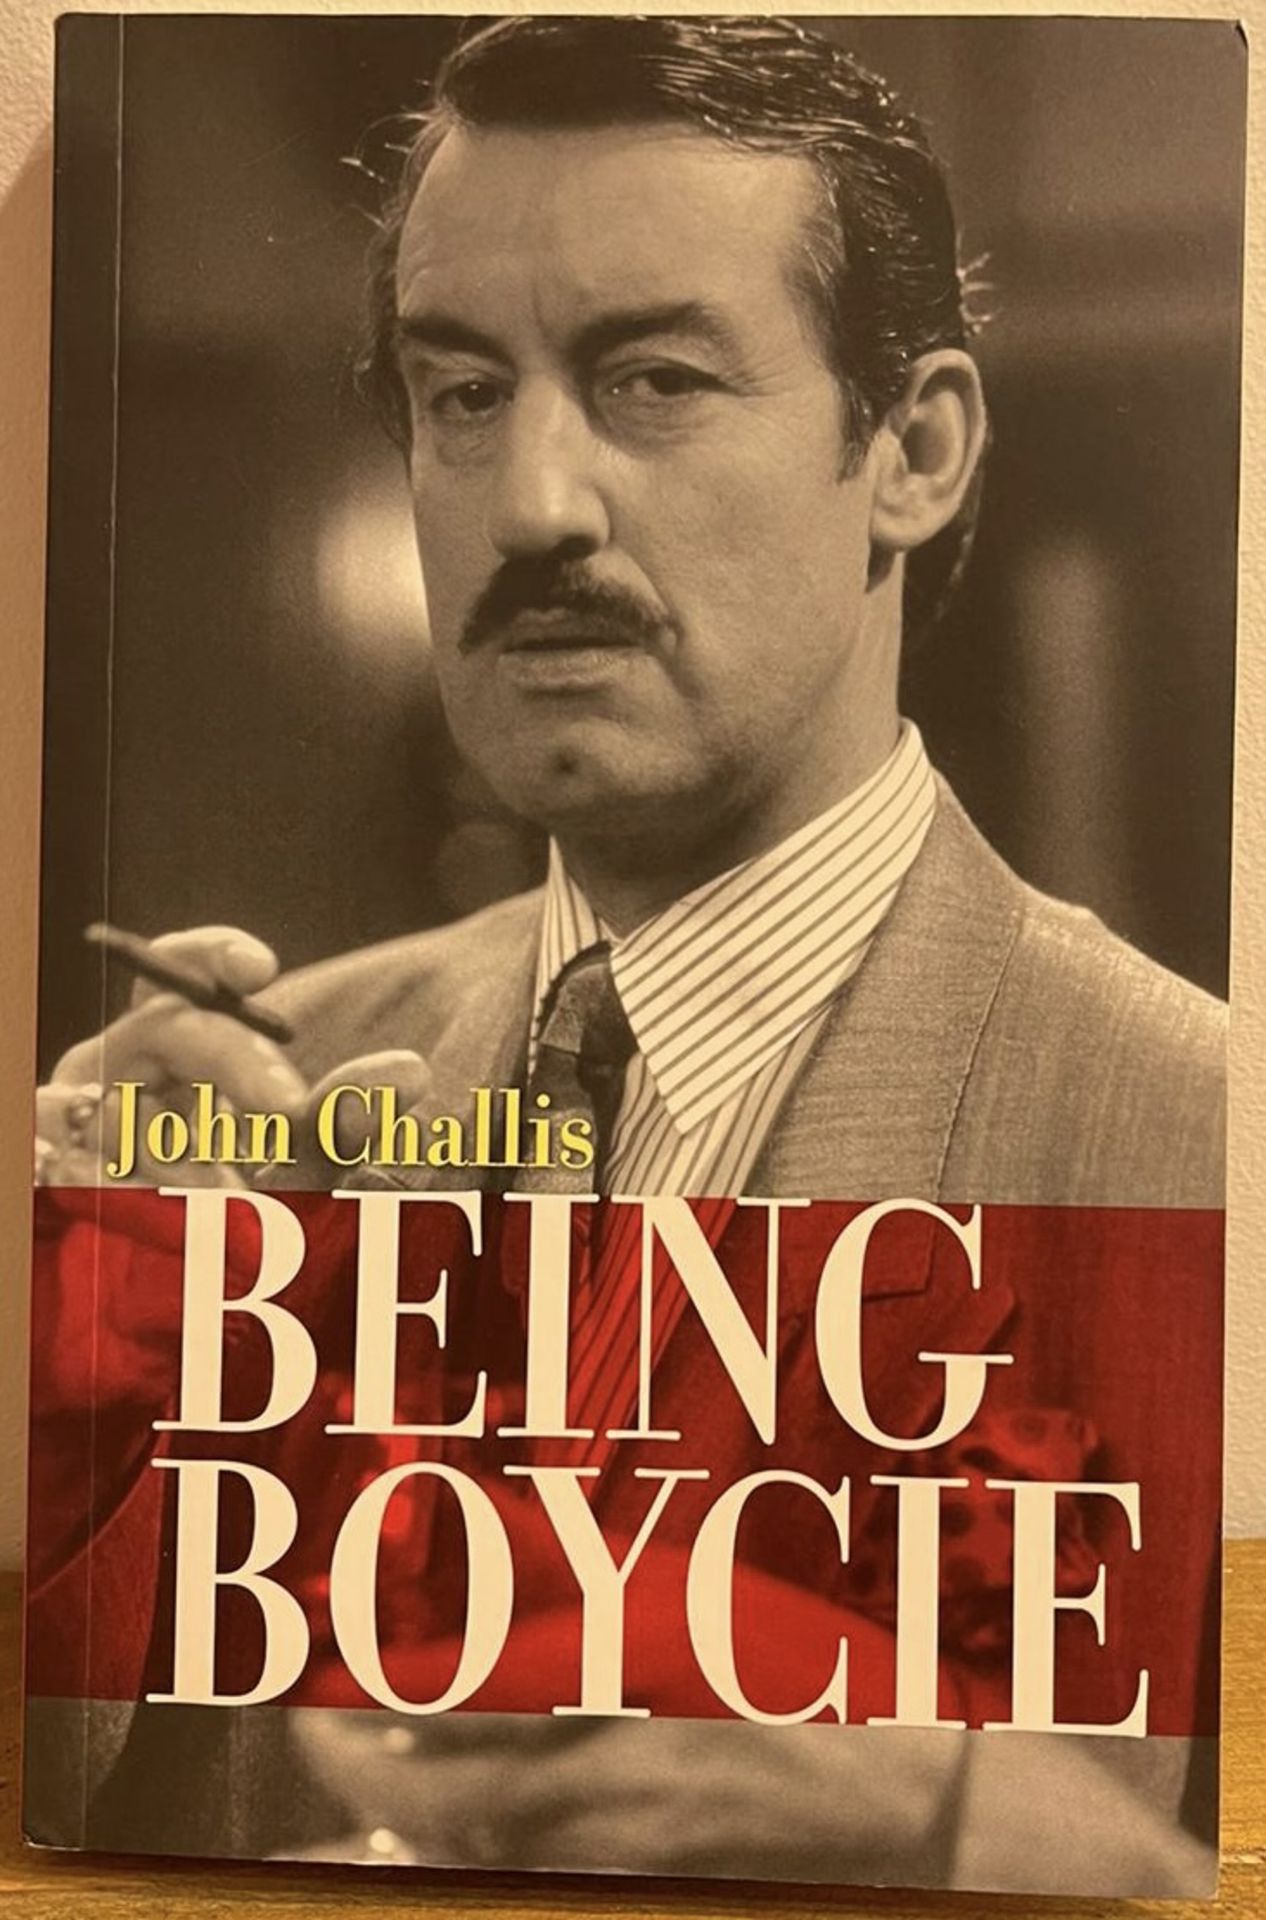 BOYCIEâ€™ BOOK, HAND SIGNED BY â€˜JOHN CHALLISâ€™ OF ONLY FOOLS & HORSES - NO VAT! - Image 5 of 8